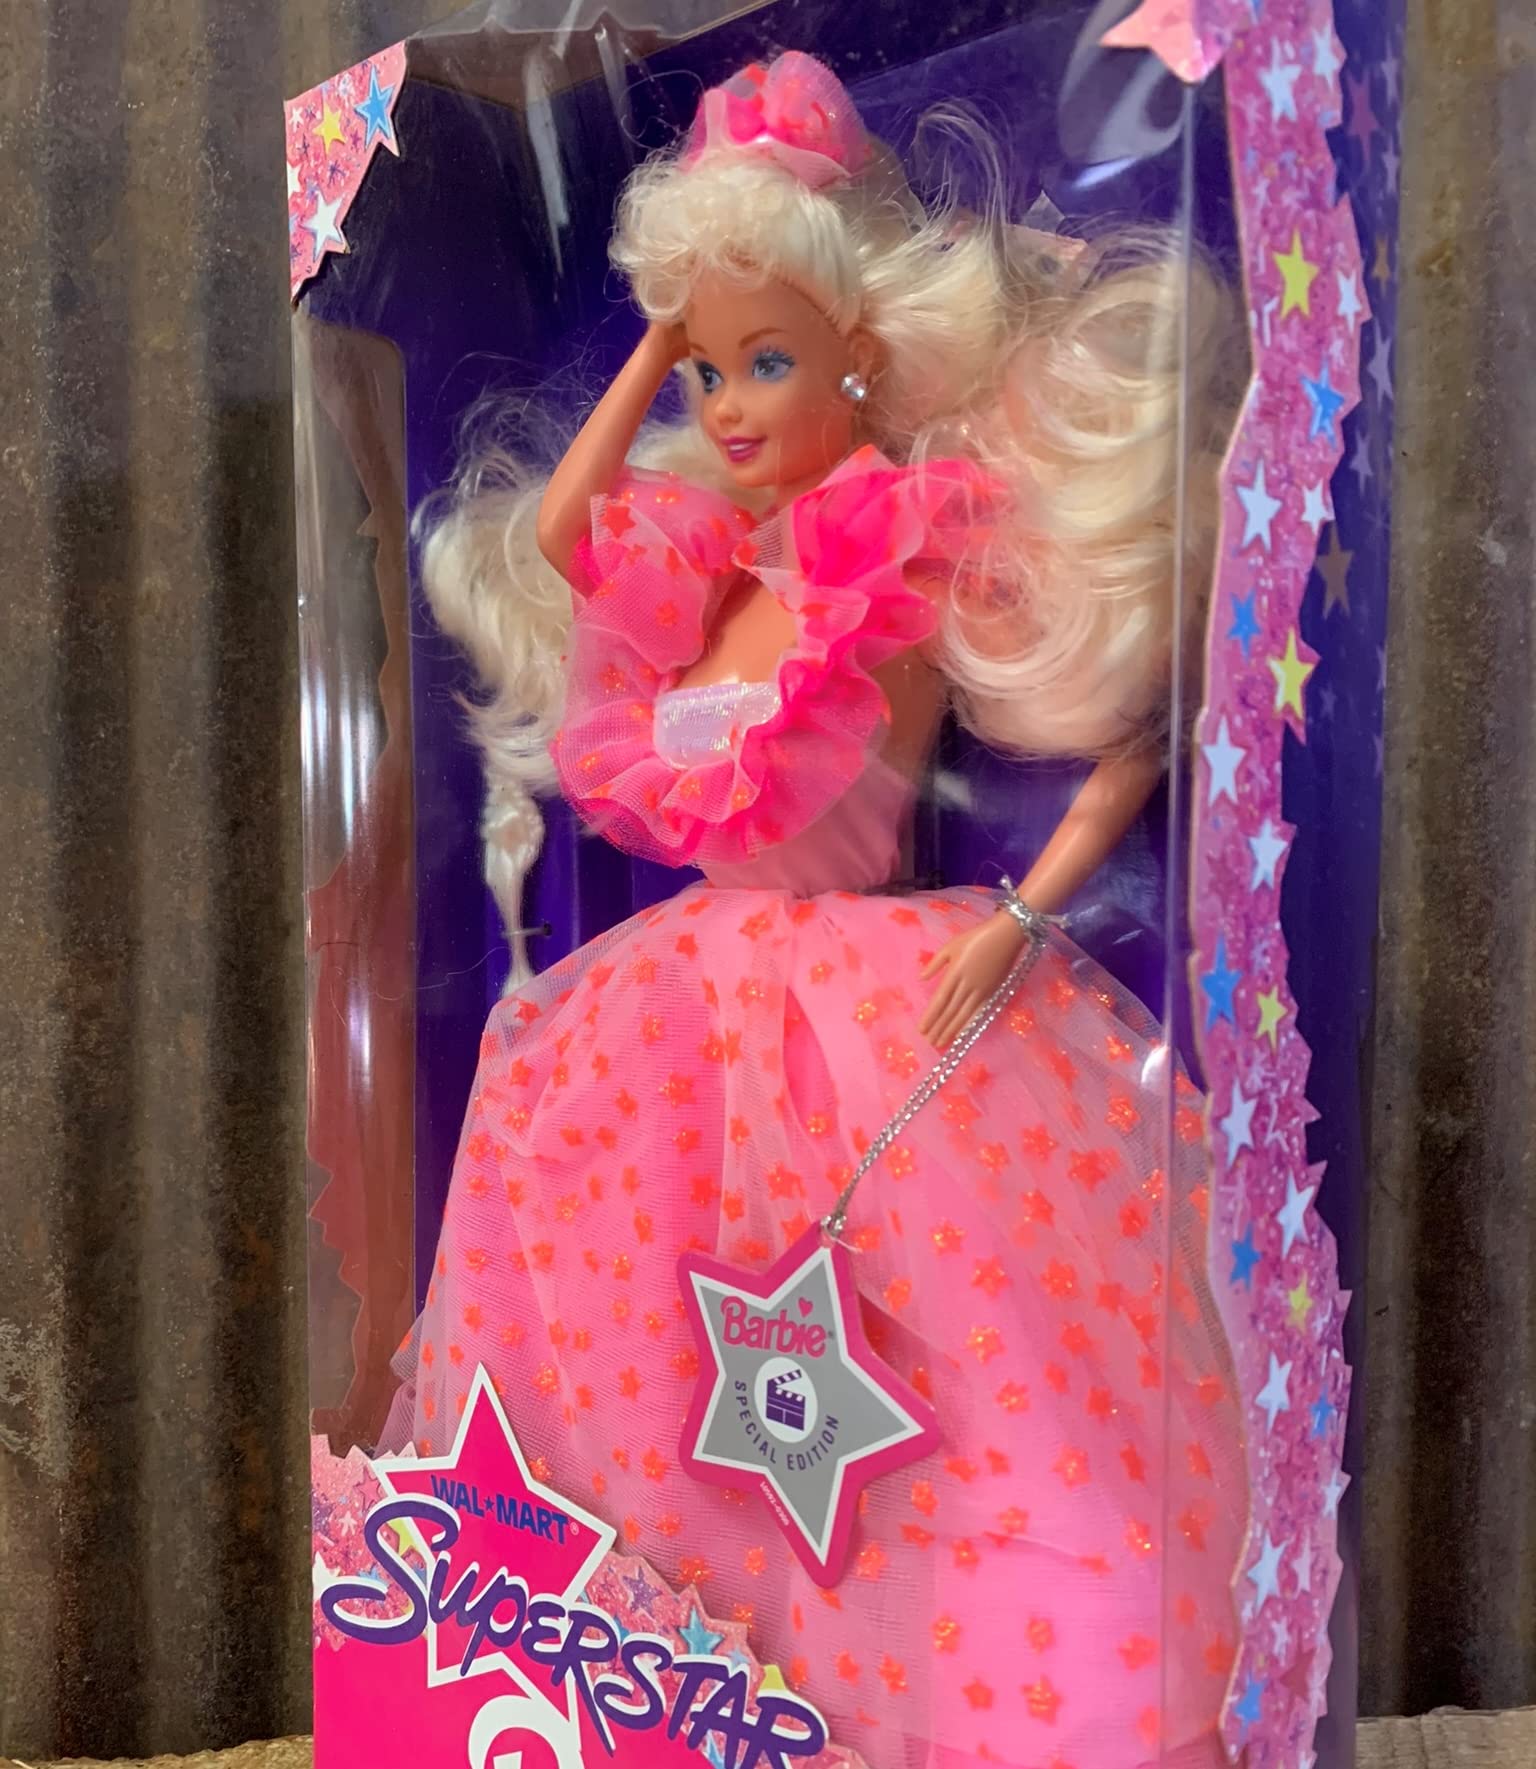 Superstar Barbie Doll Wal*Mart Special Edition 1993 by Barbie